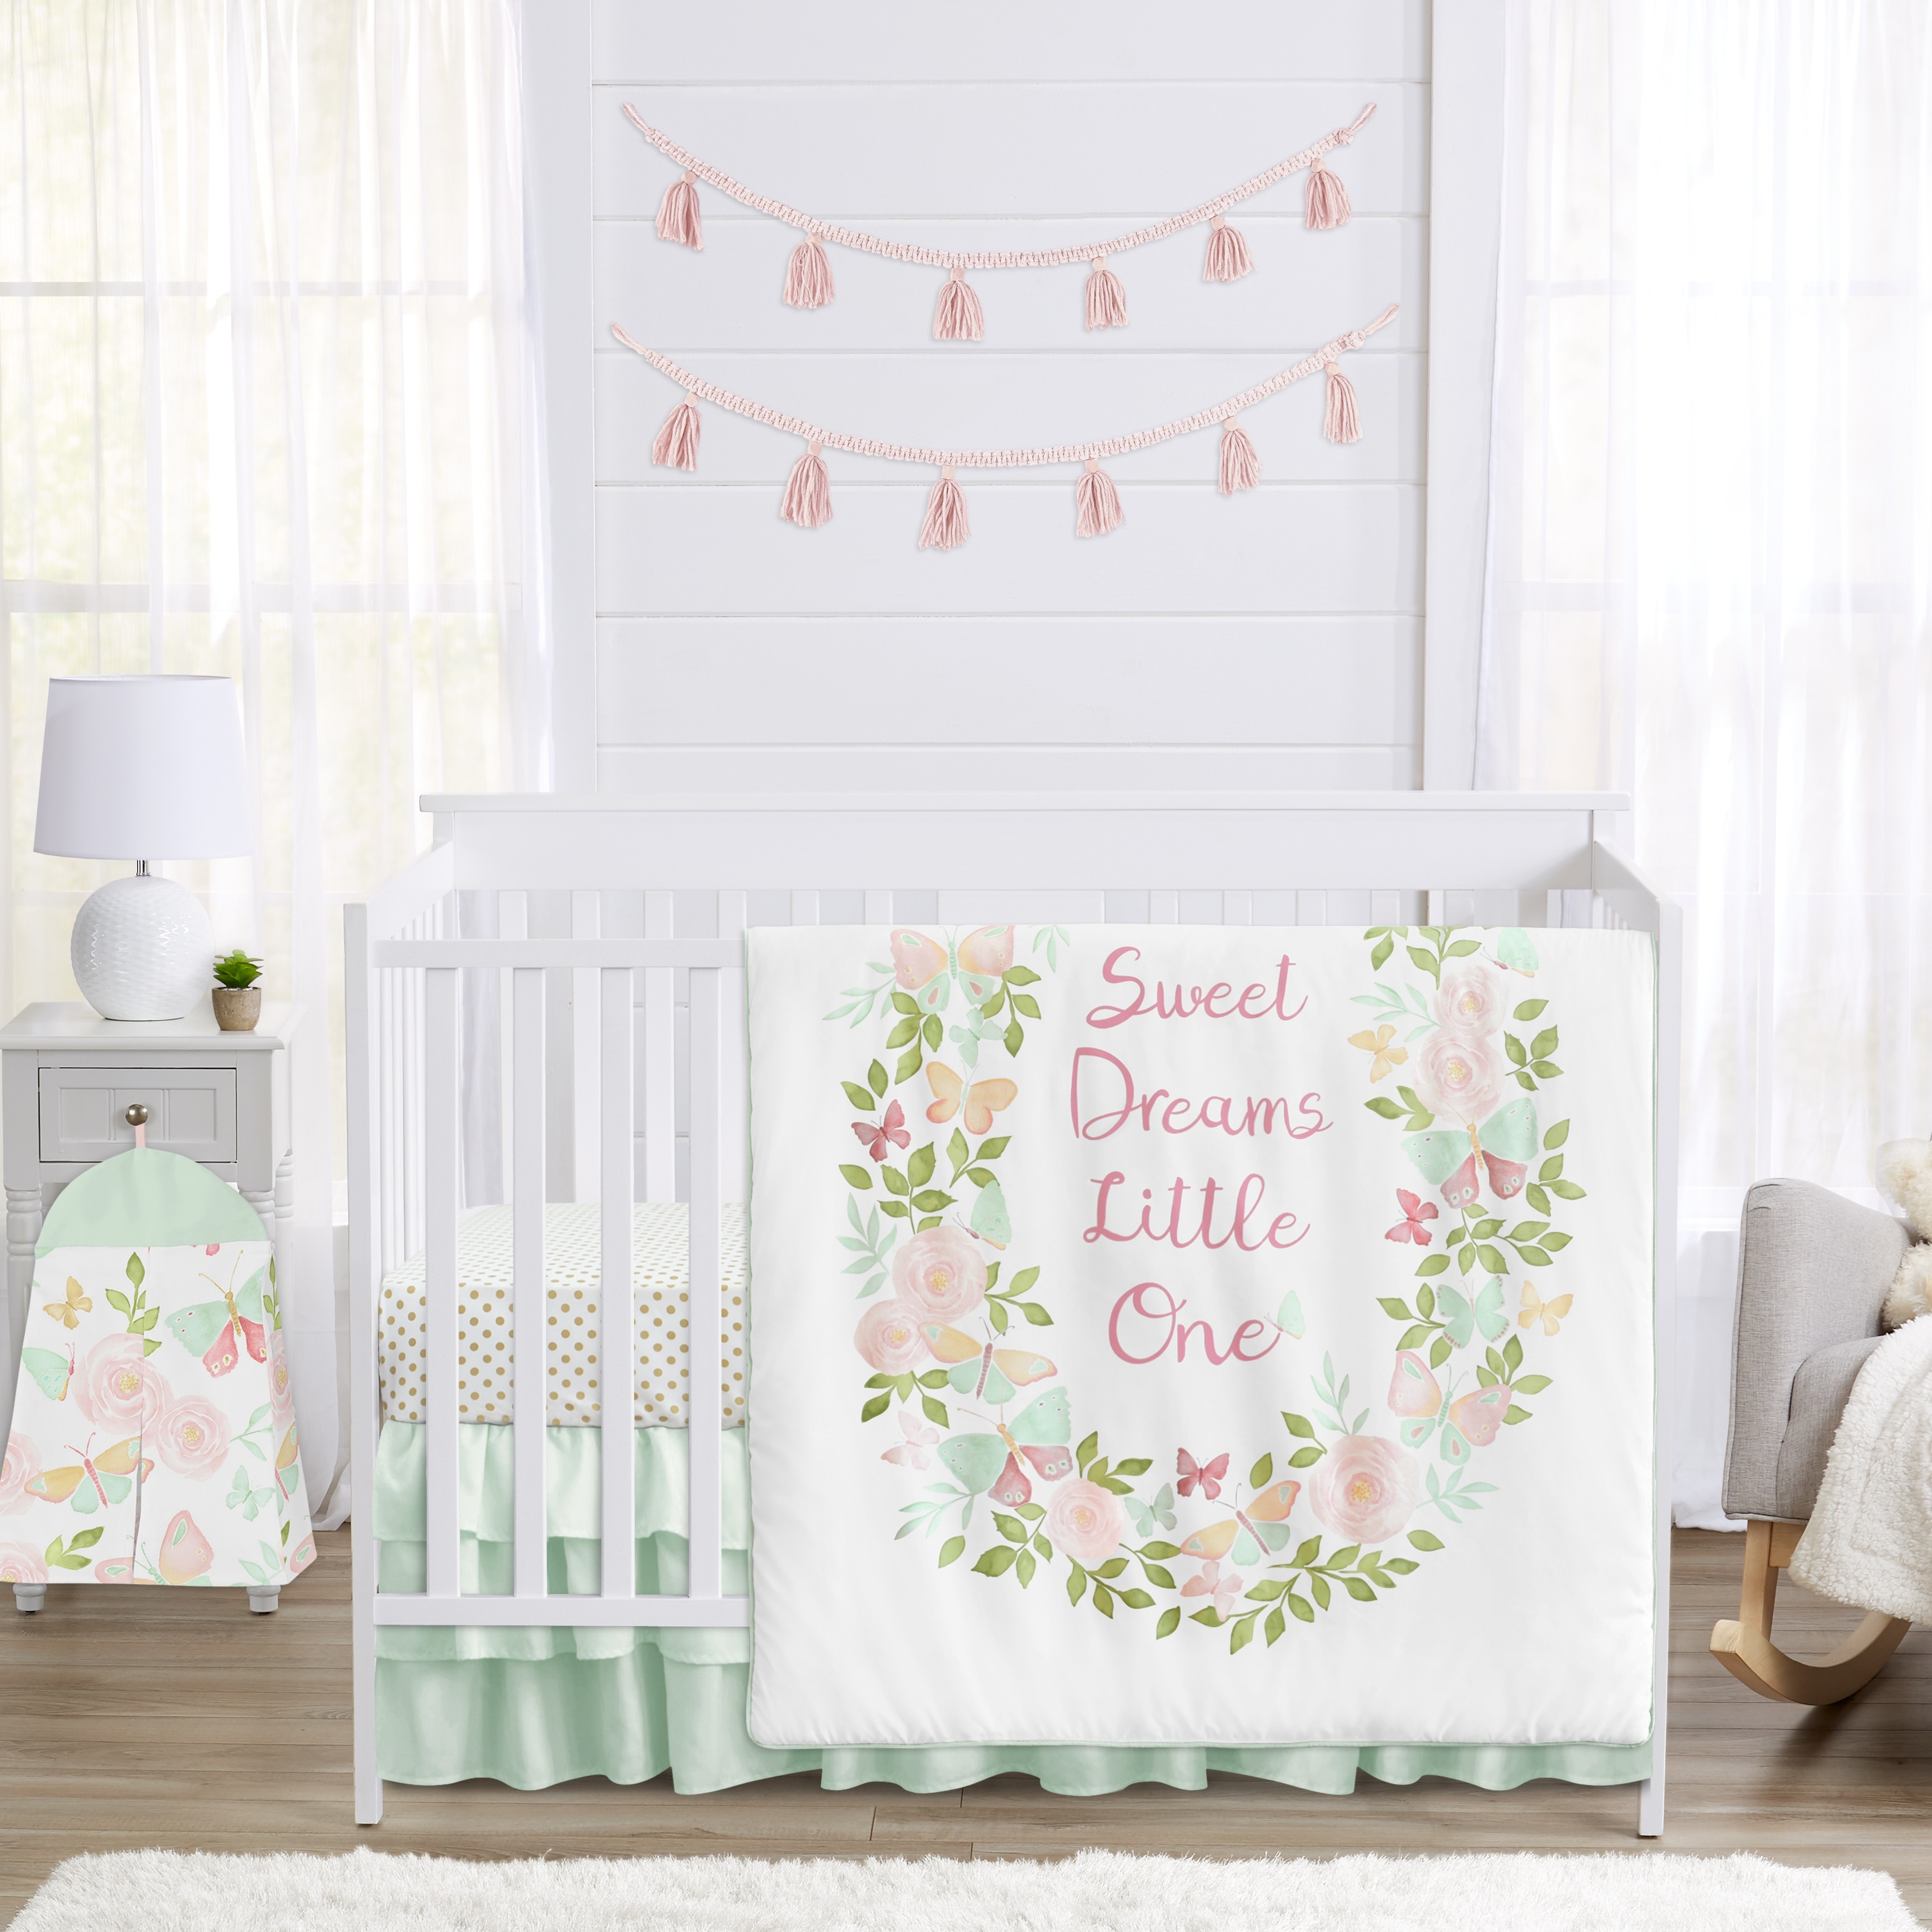 Sweet Jojo Designs Blush Pink, Mint and White Shabby Chic Butterfly Floral Collection Girl 4-piece Crib Bedding Set